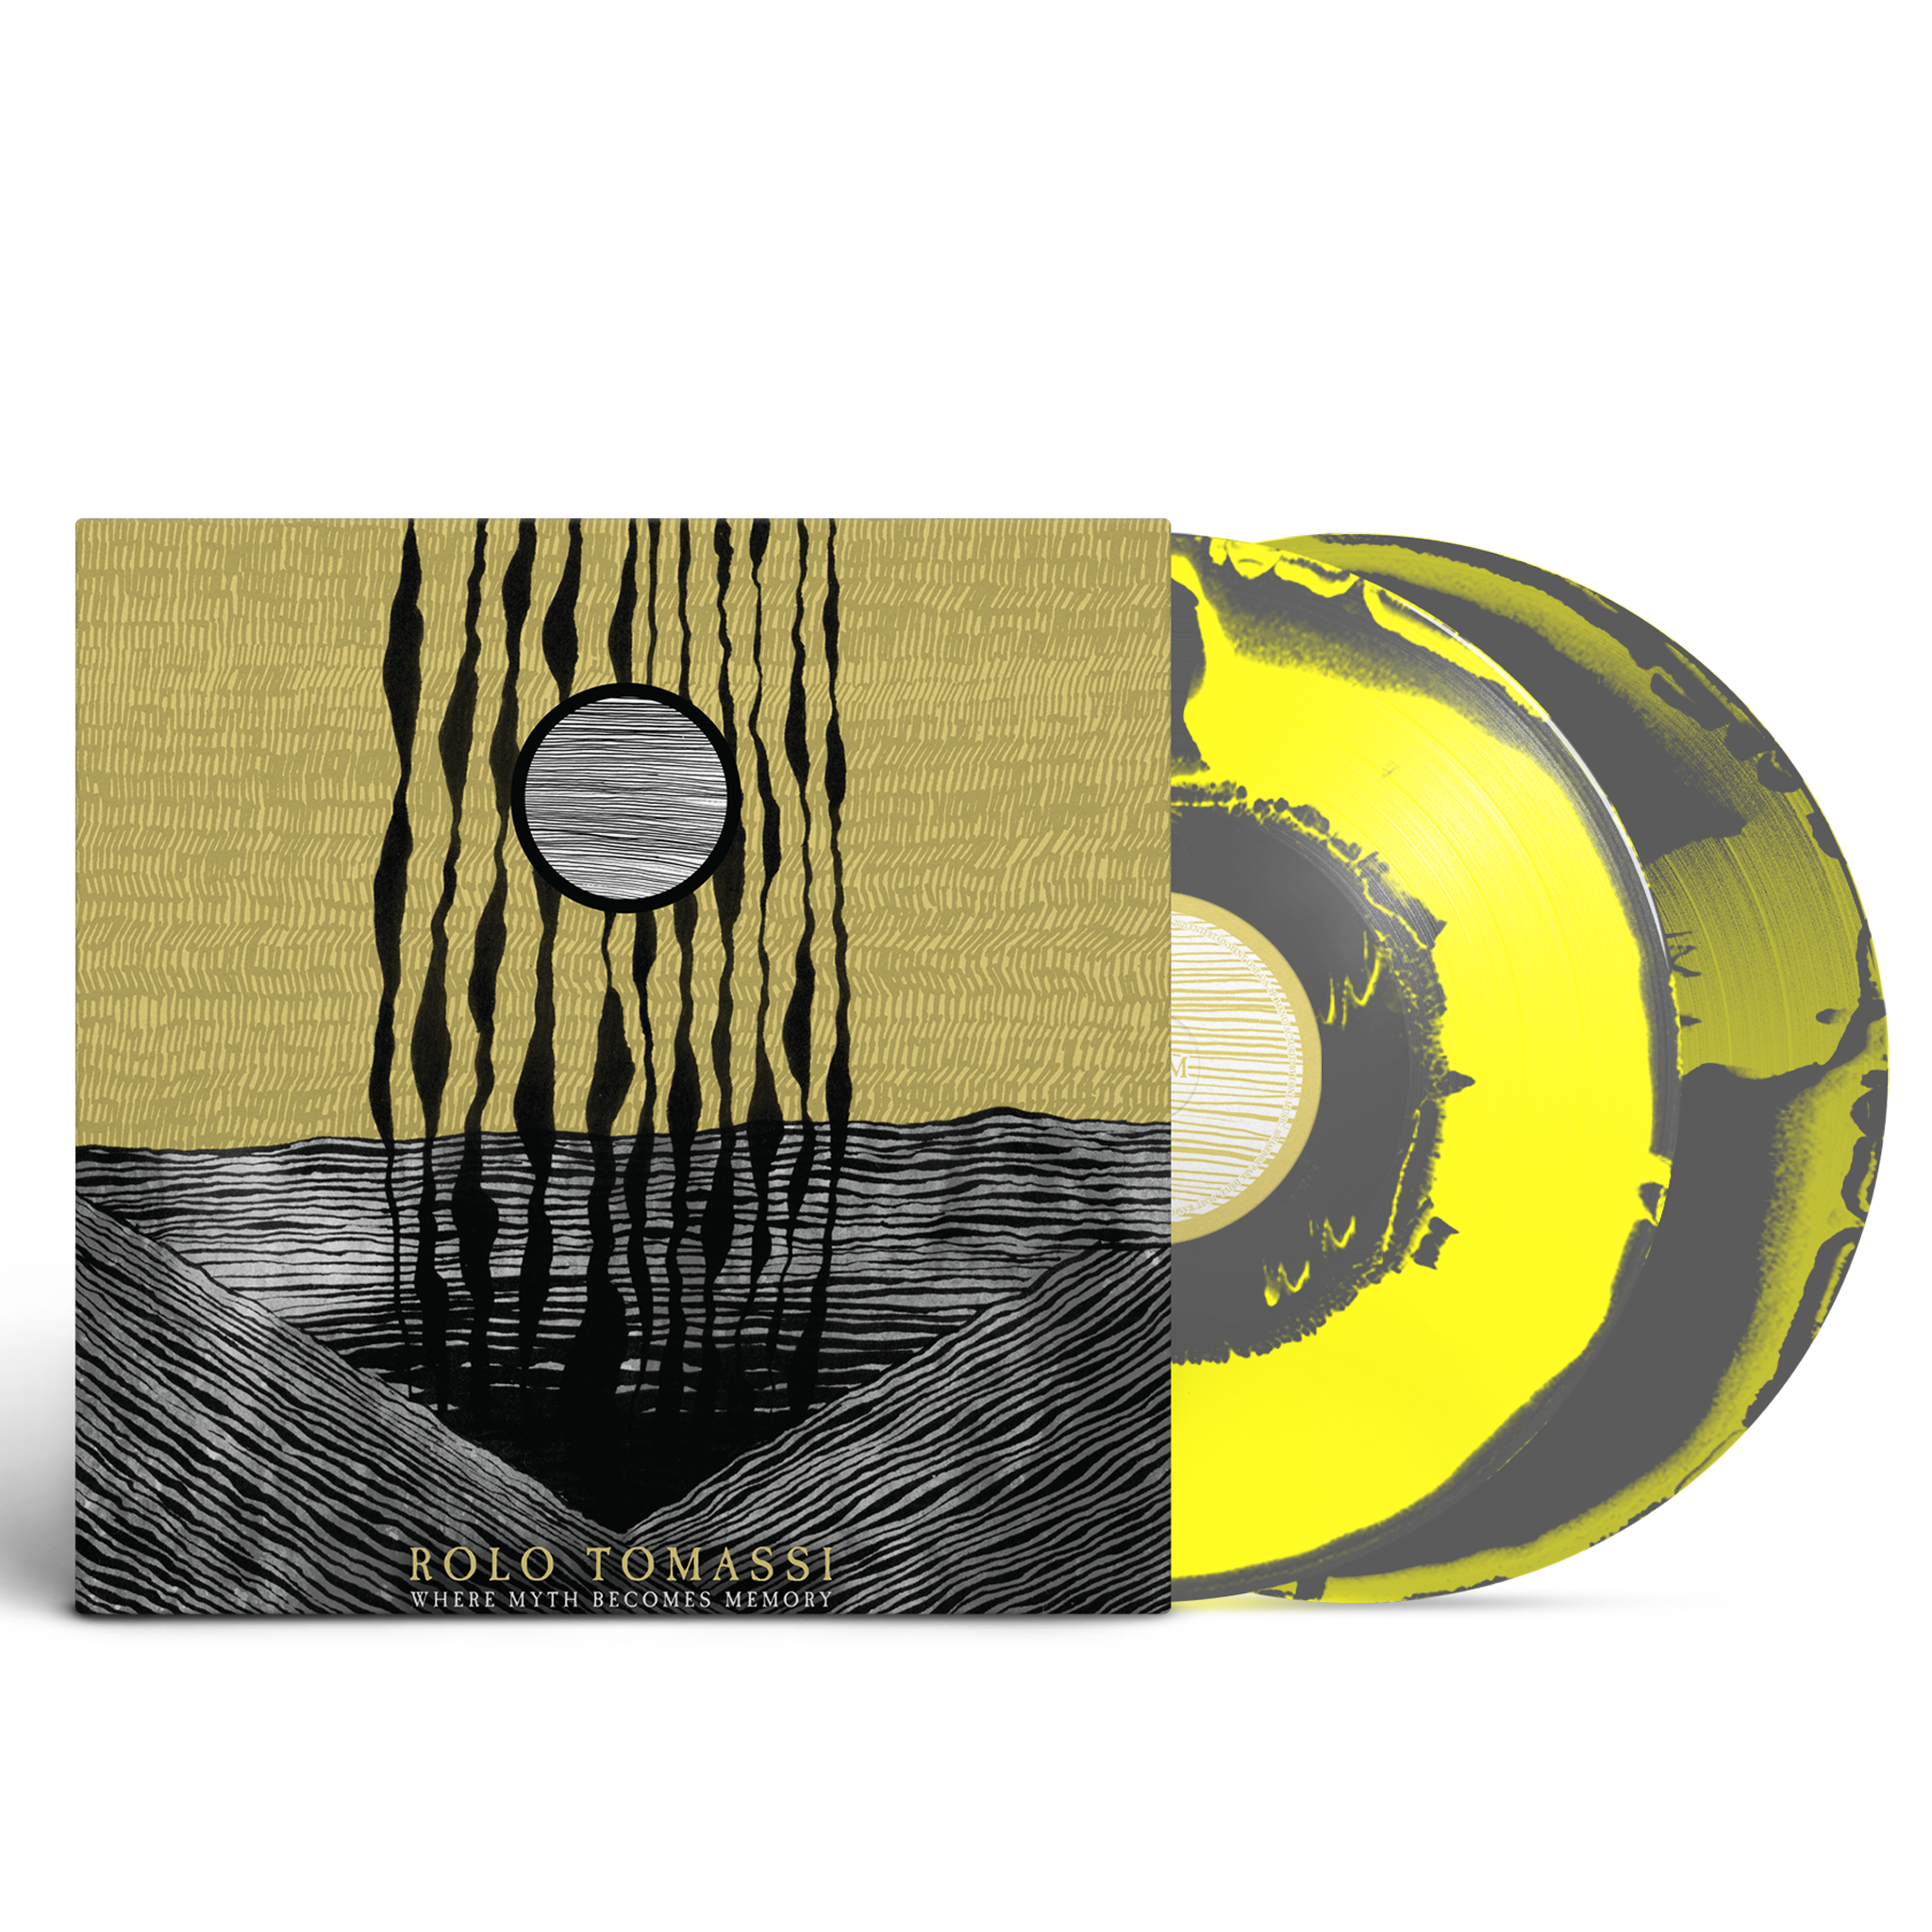 Rolo Tomassi Where Myth Becomes Memory Vinyl Shop Official Rolo Tomassi Merch MNRK Heavy